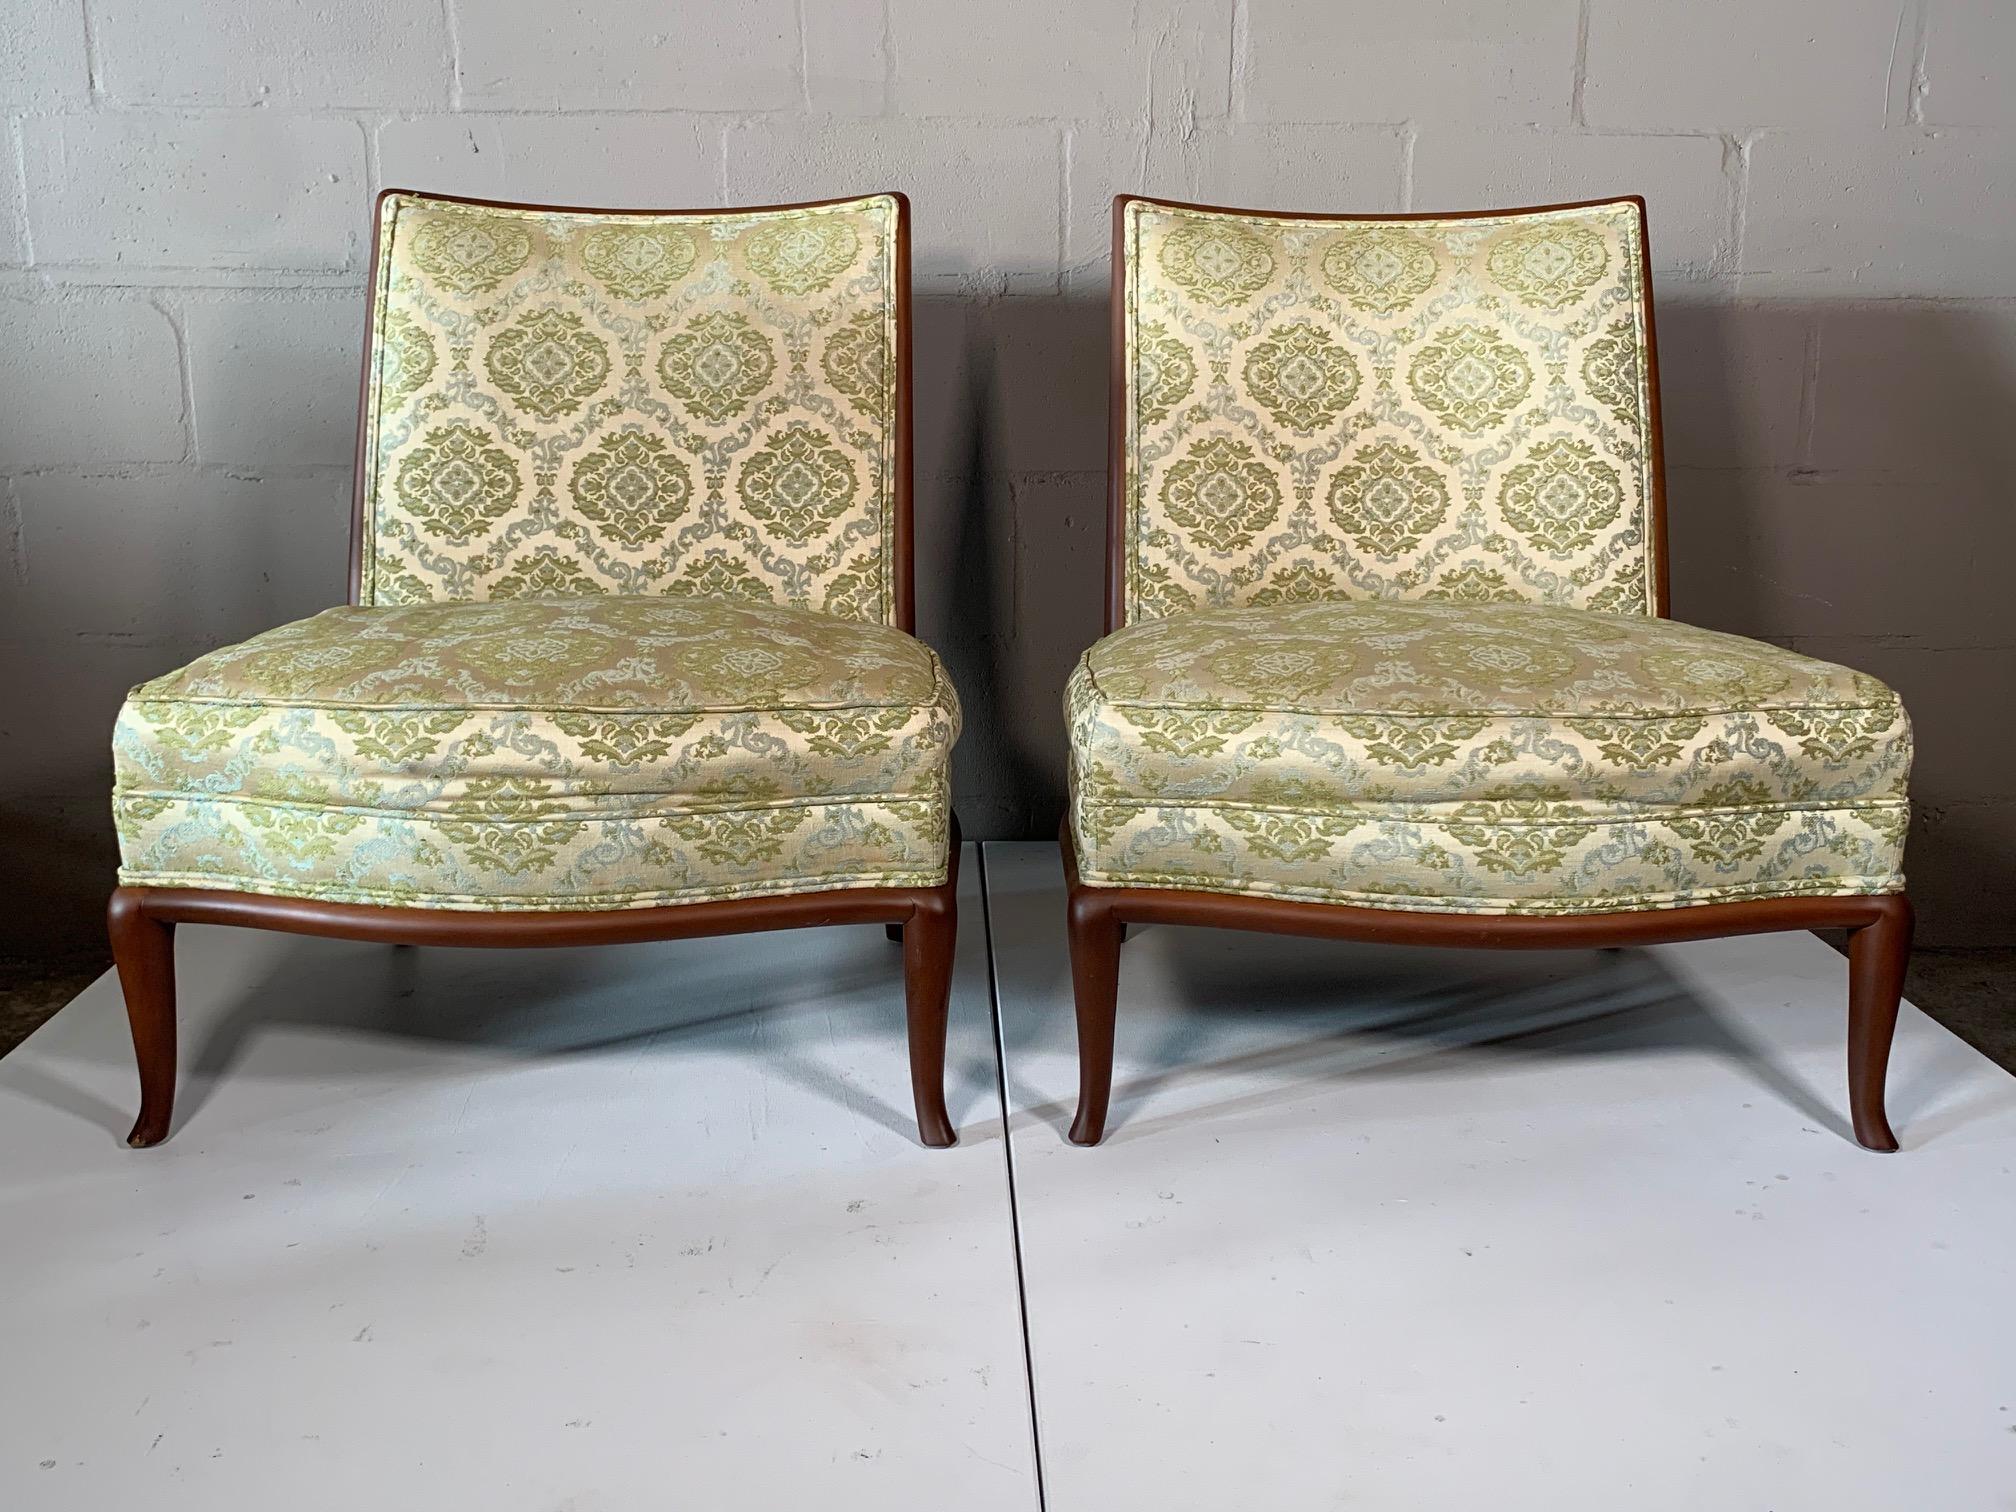 A pair of rare and unusual French style slipper chairs by T.H. Robsjohn-Gibbings for Widdicomb, circa 1950s.